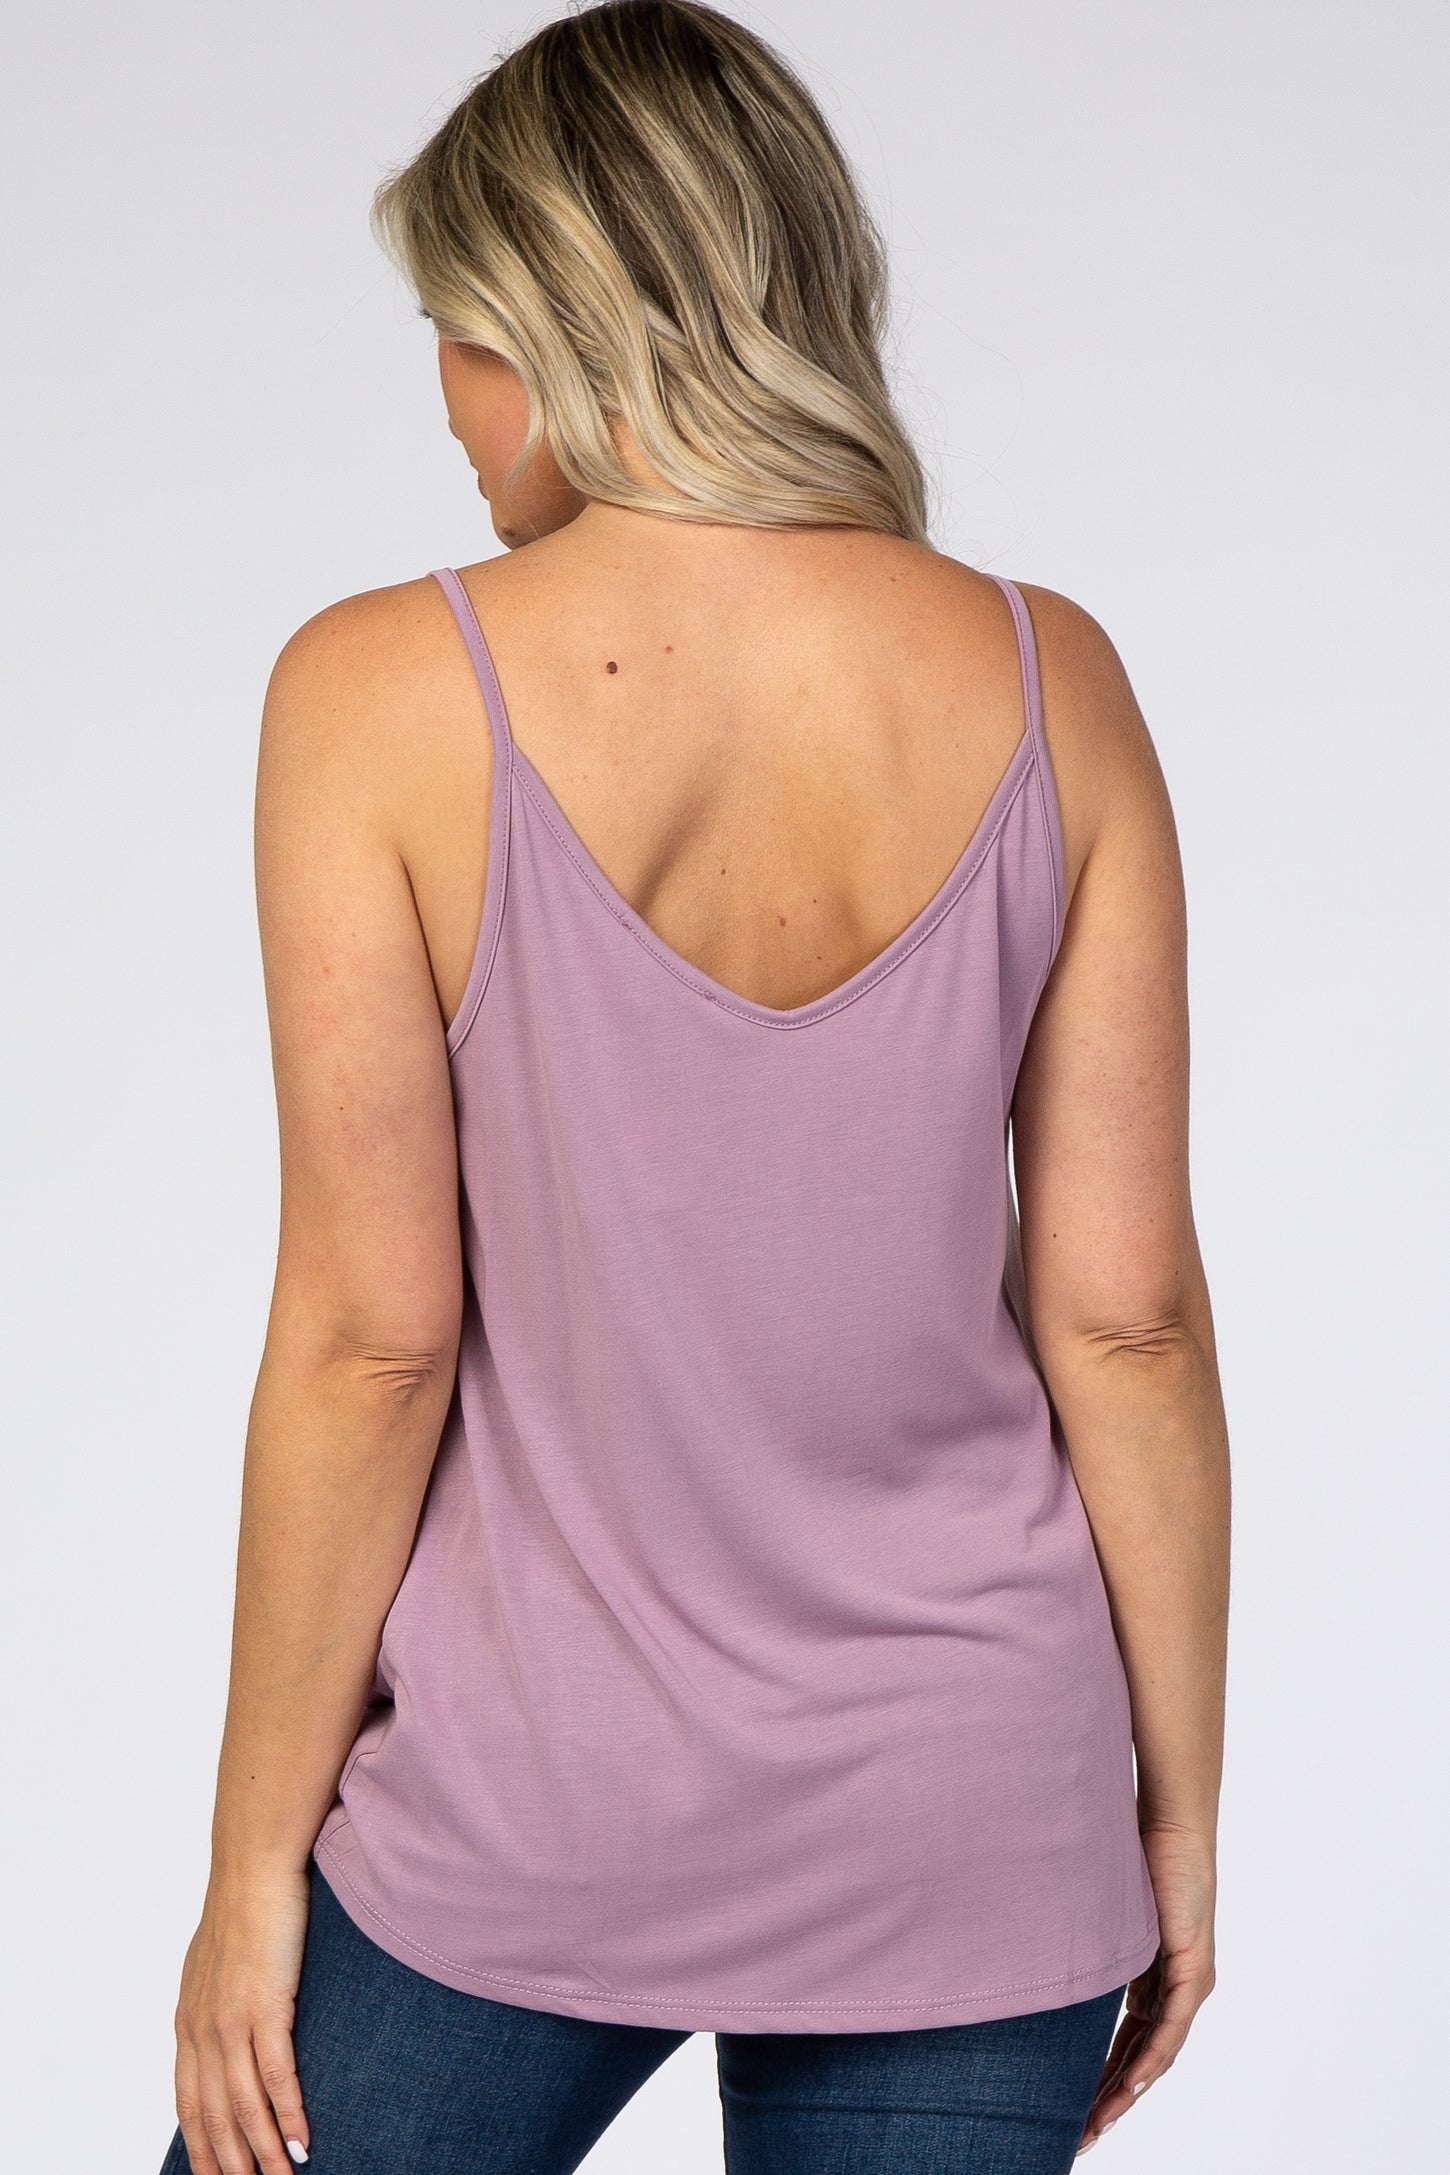 Lavender Solid Knot Front Cami Strap Maternity Top